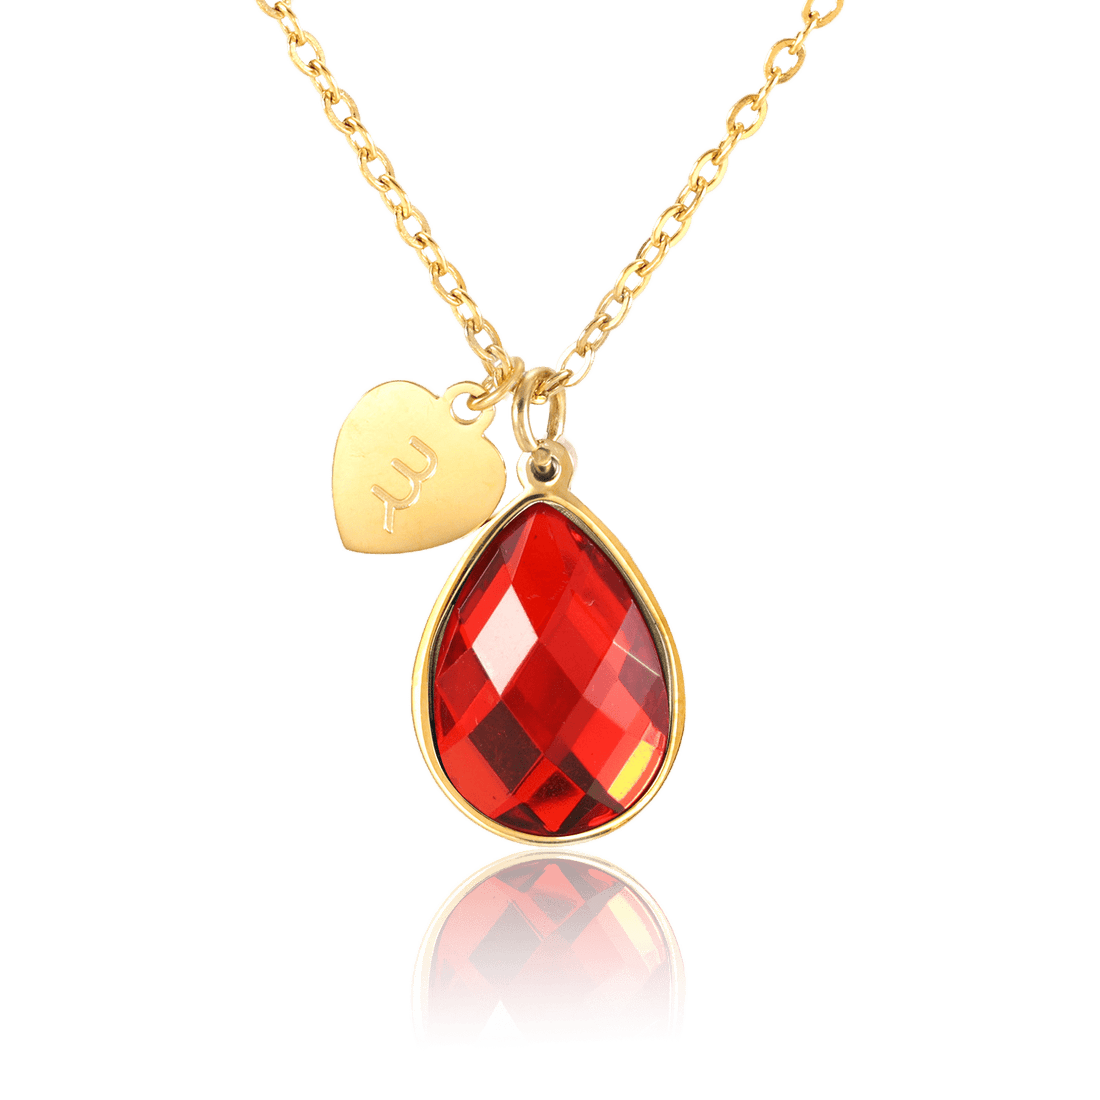 bianco rosso Necklaces Gold July Birthstone - Ruby cyprus greece jewelry gift free shipping europe worldwide